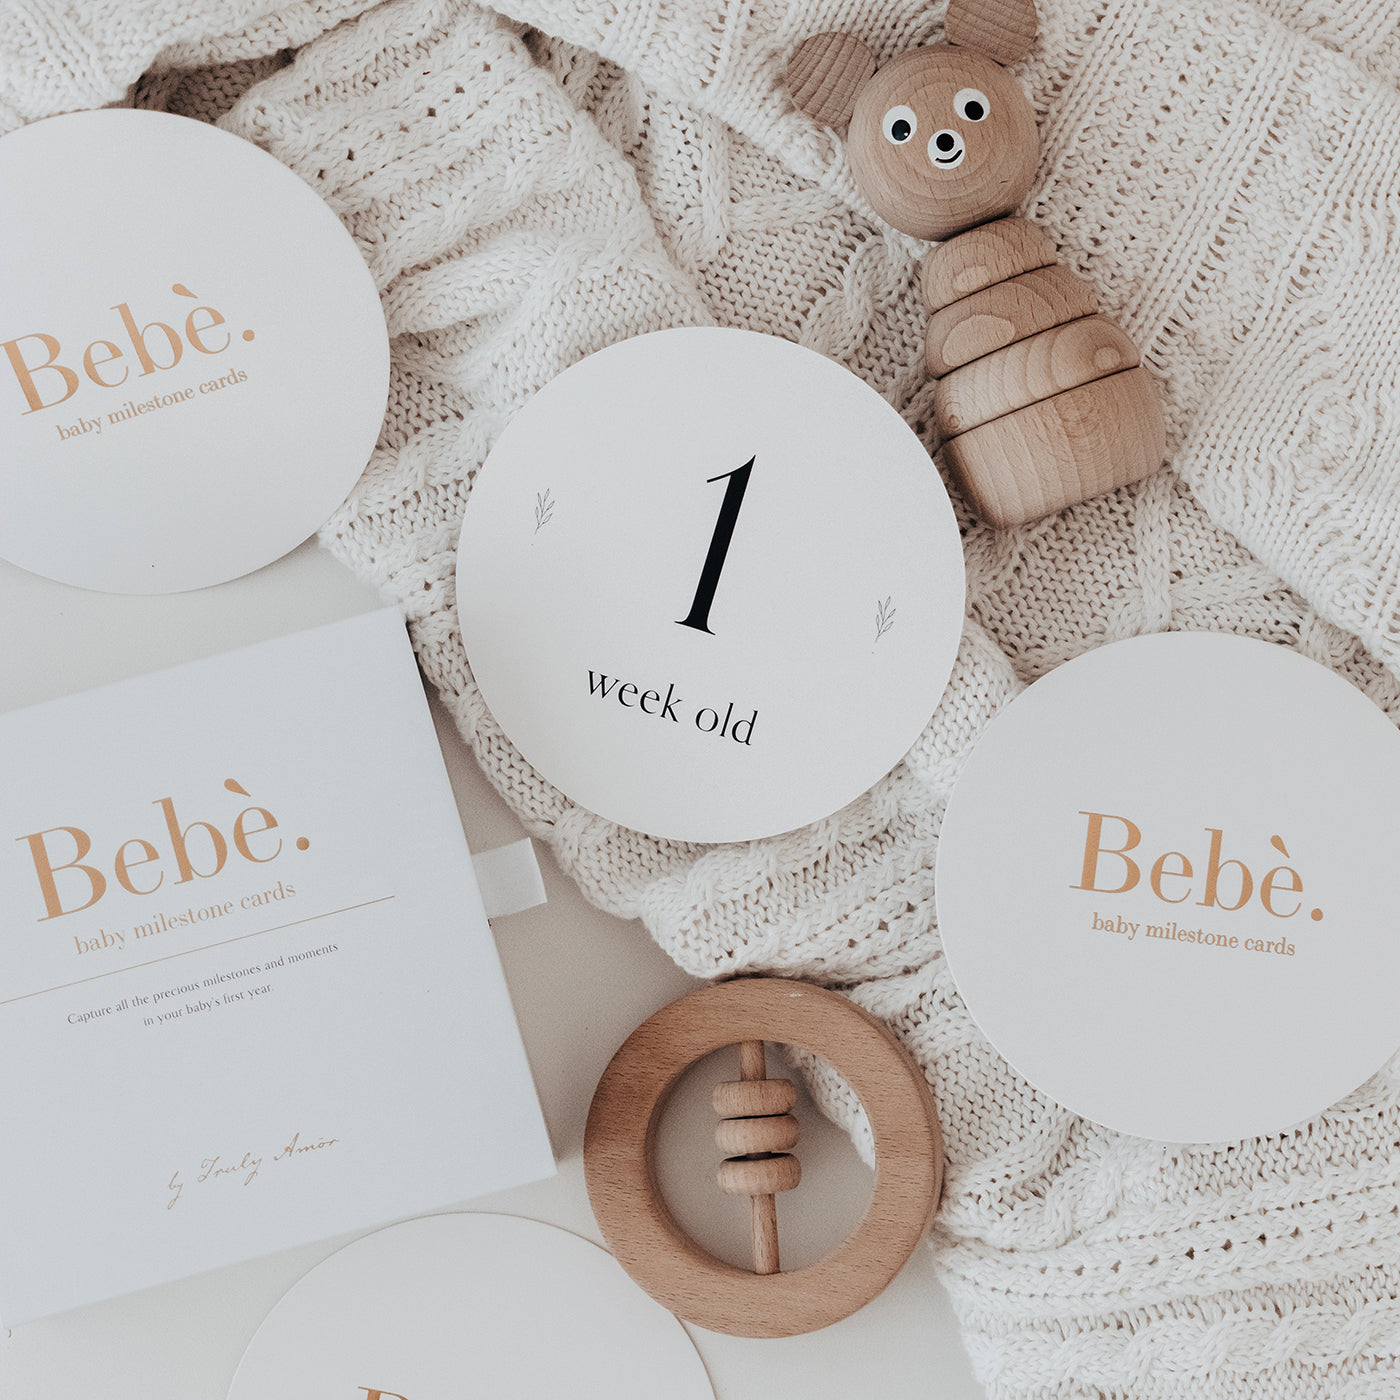 Bebé Baby Milestone Cards with baby toys